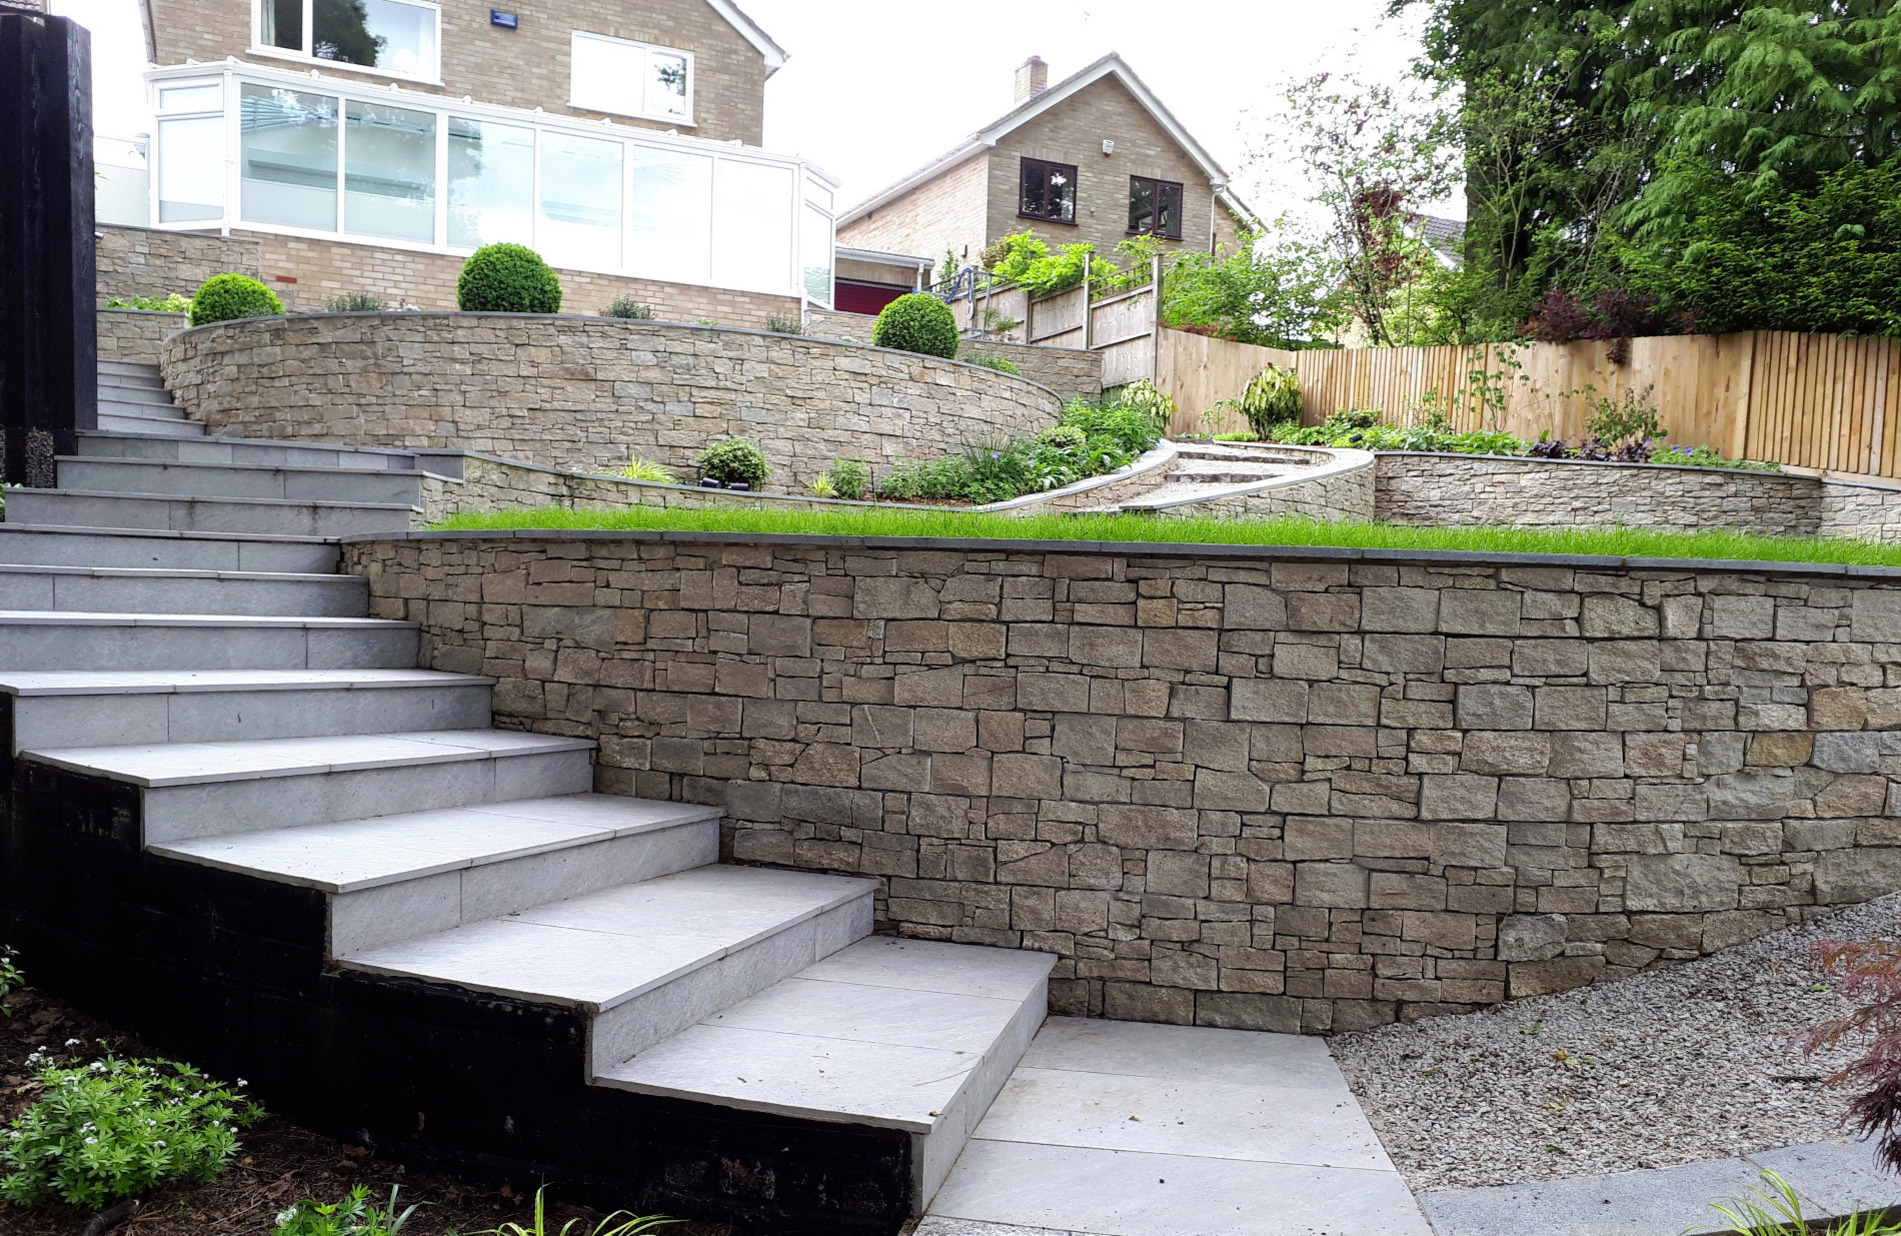 A sloping garden design in Sandhurst, Berkshire with stone faced retaining walls and terraced levels.